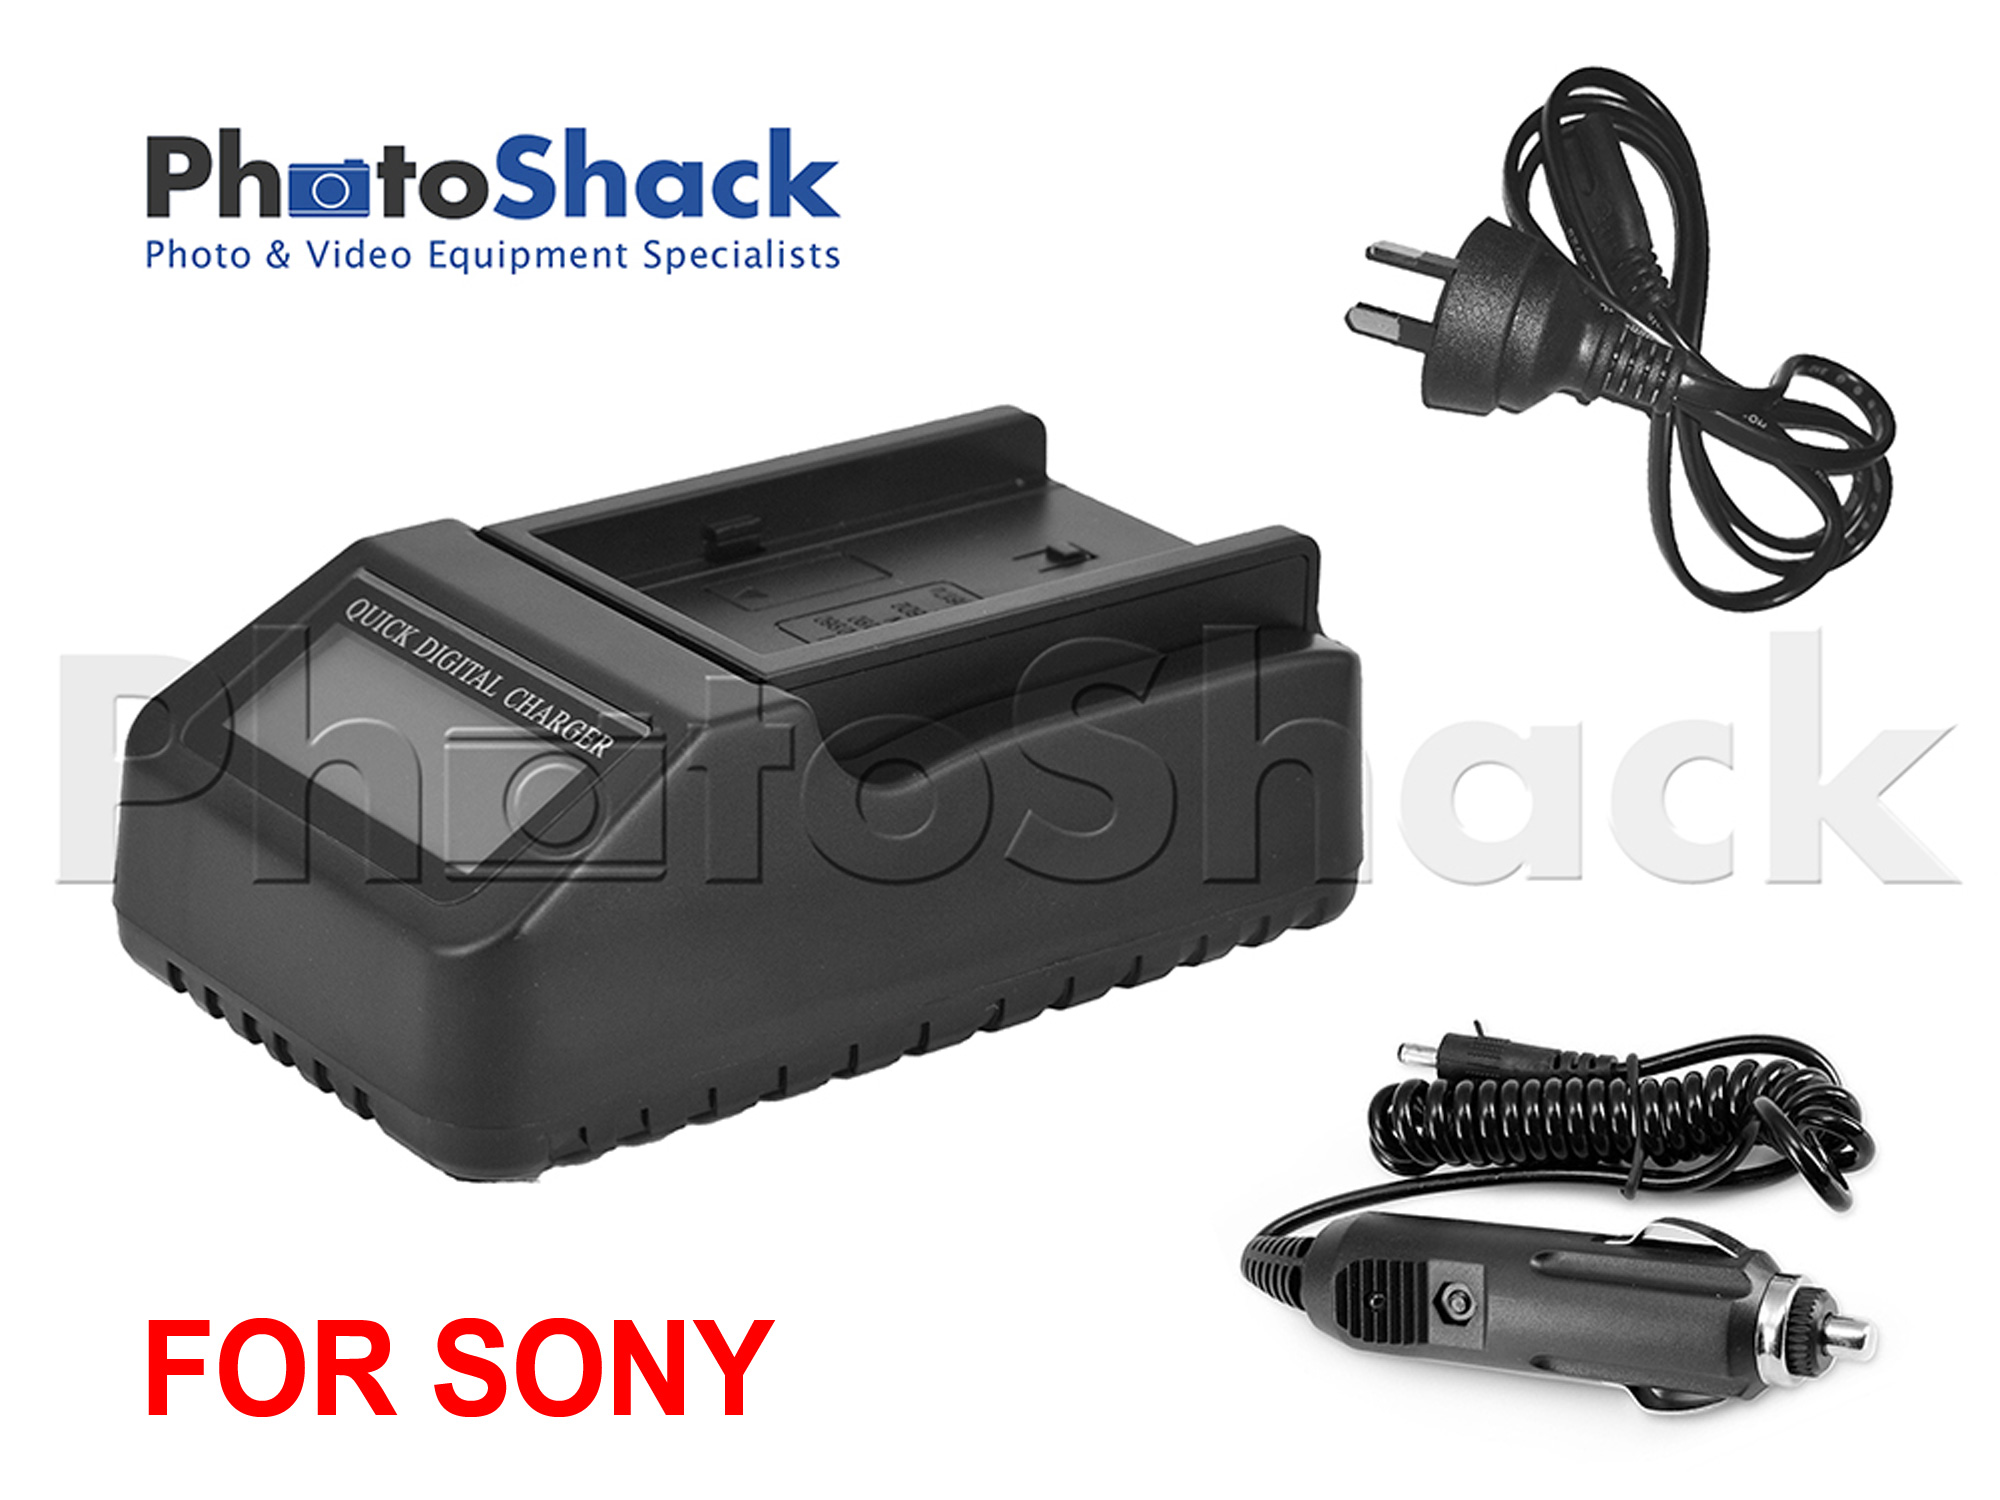 Multifunction Digital Charger with LCD Display For Sony